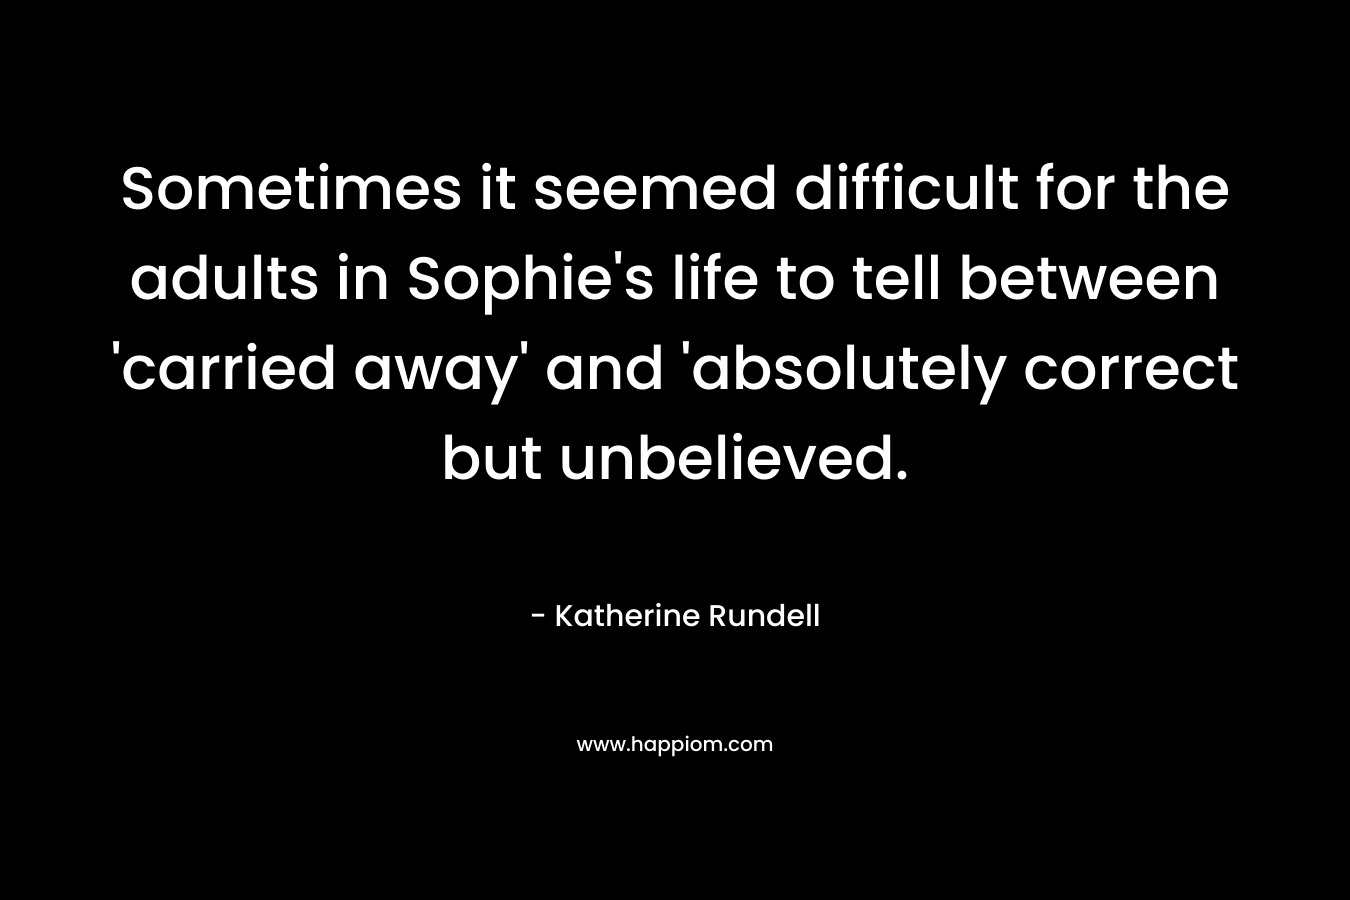 Sometimes it seemed difficult for the adults in Sophie's life to tell between 'carried away' and 'absolutely correct but unbelieved.